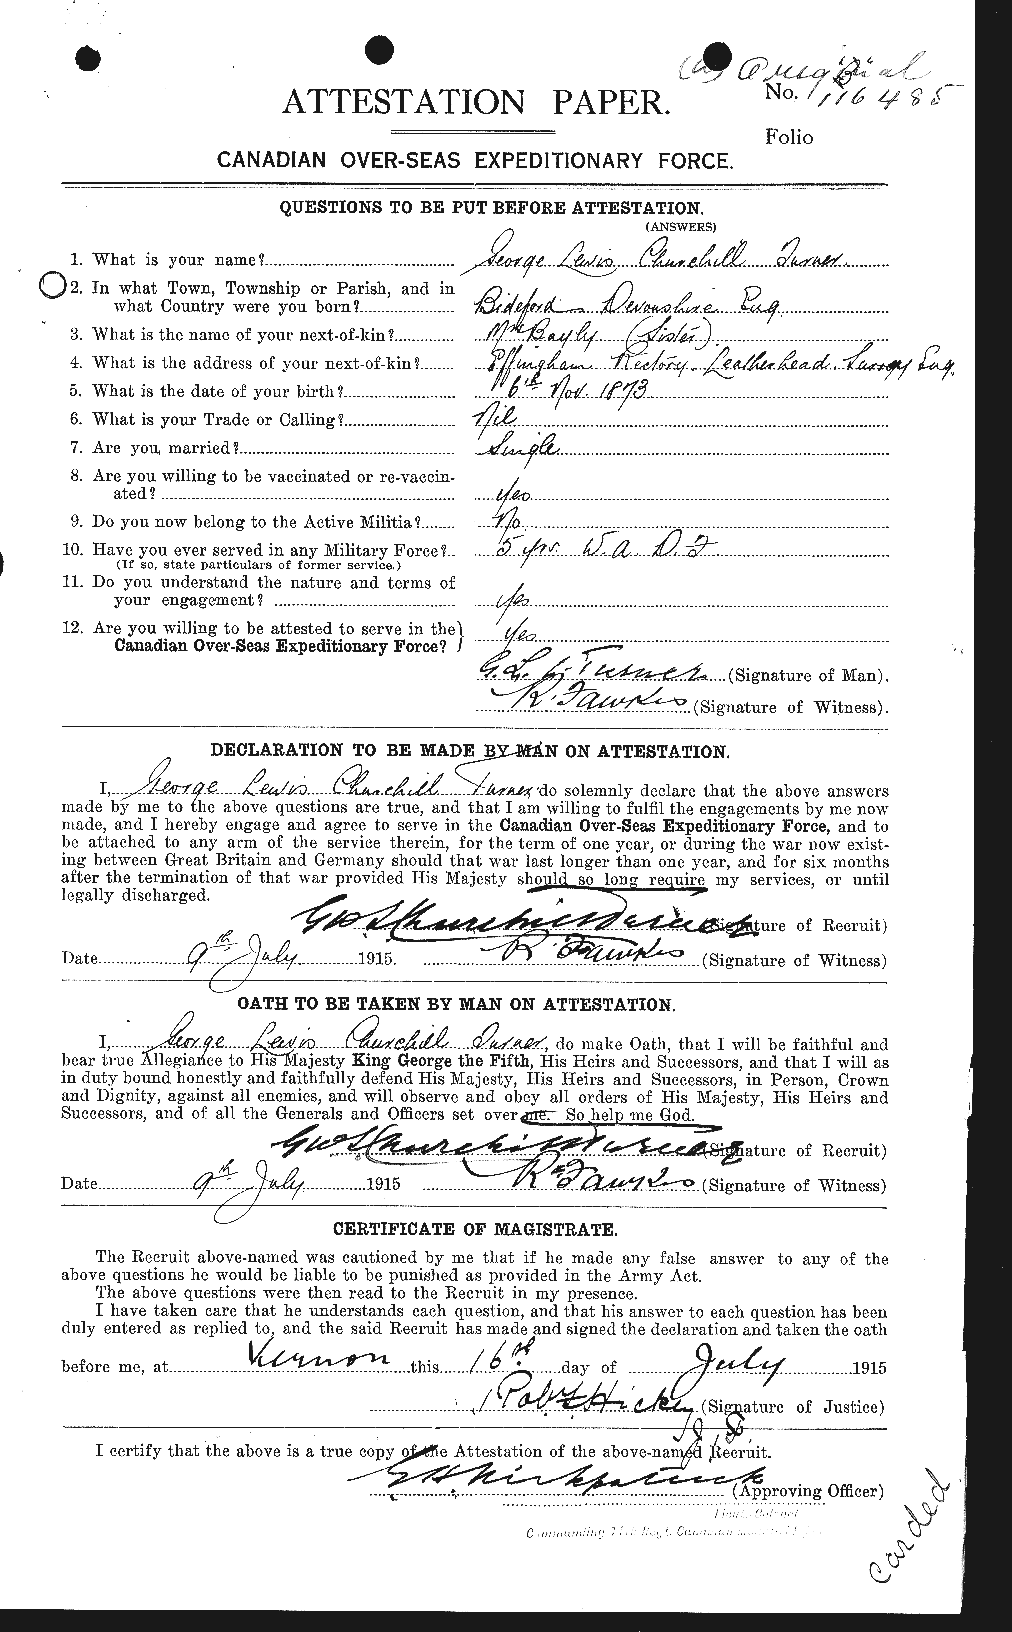 Personnel Records of the First World War - CEF 648526a